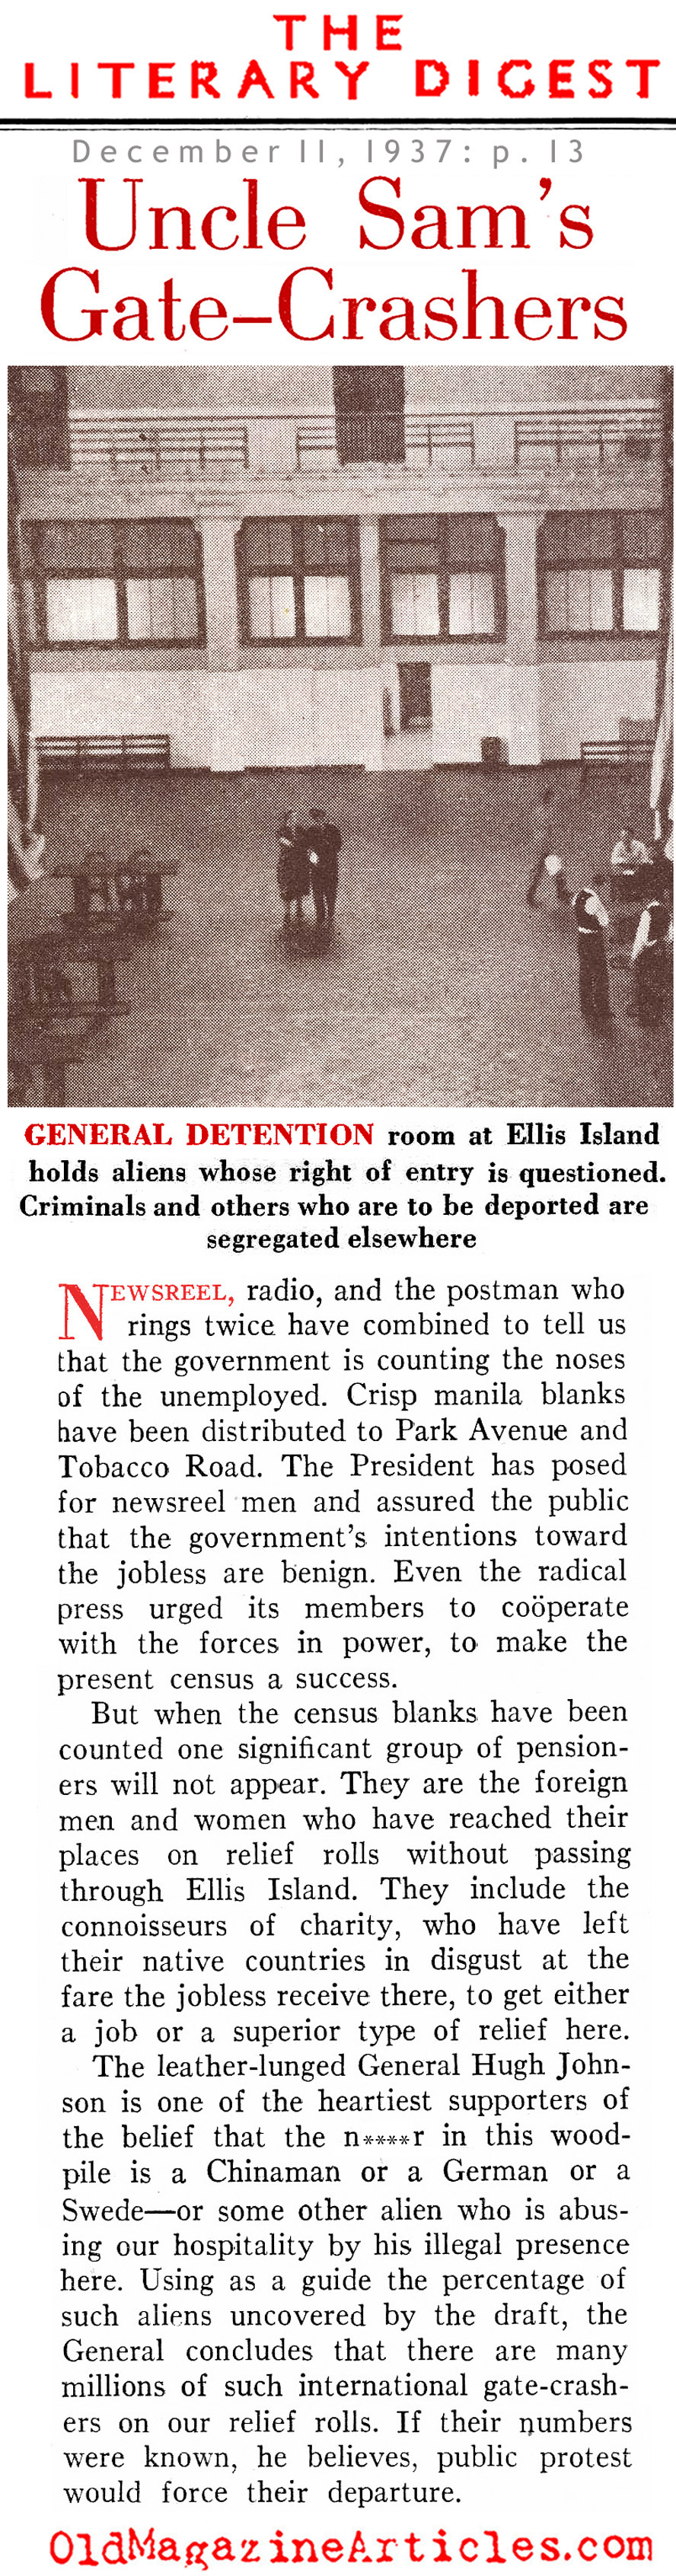 Deported From Ellis Island (Literary Digest, 1937)